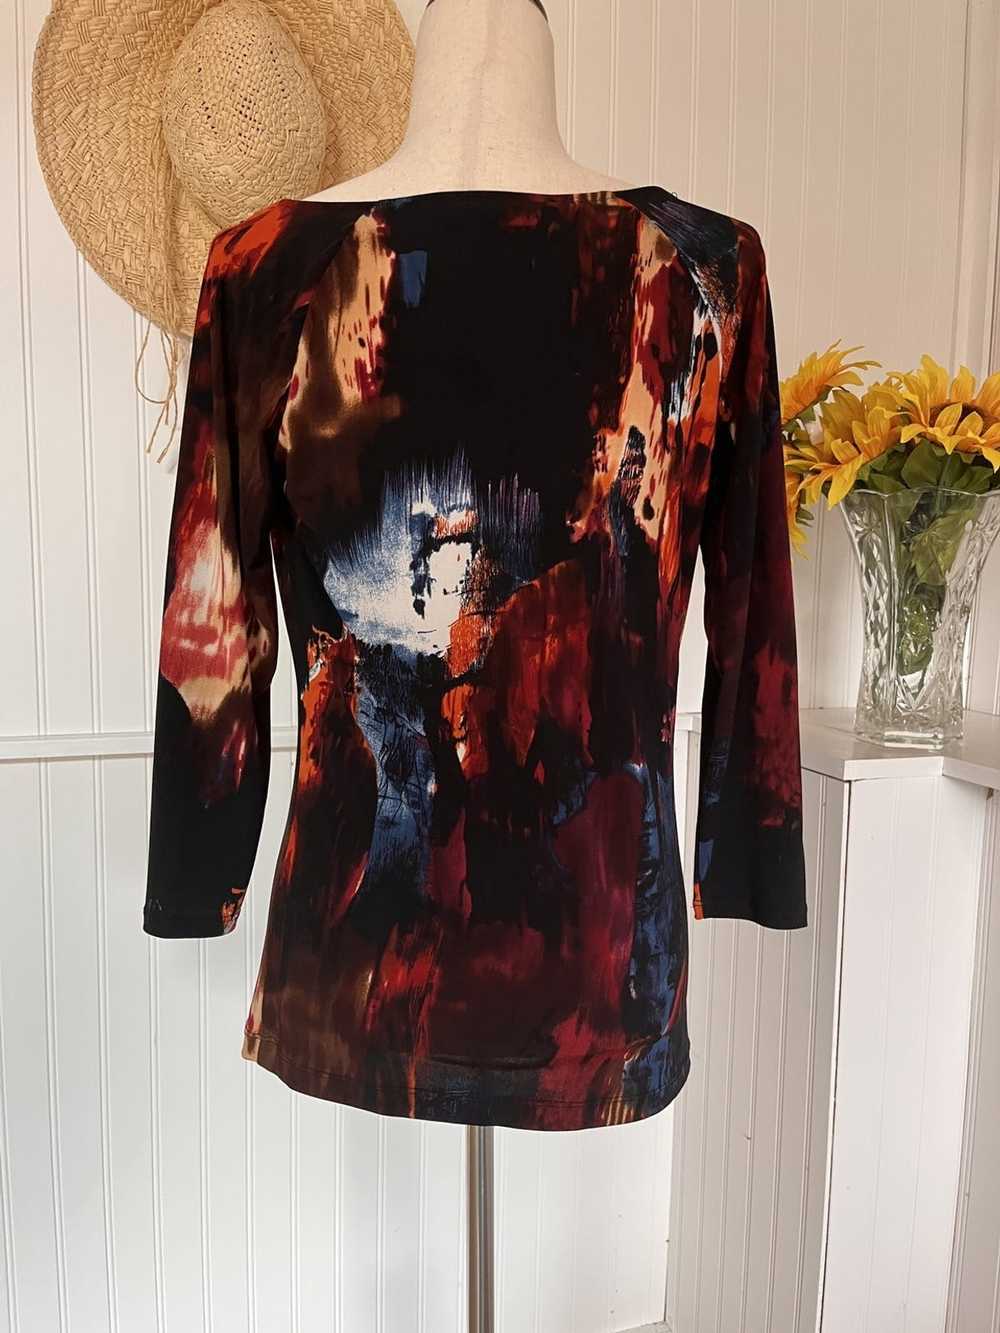 Other Grace Elements Multicolored Blouse Size Sma… - image 9